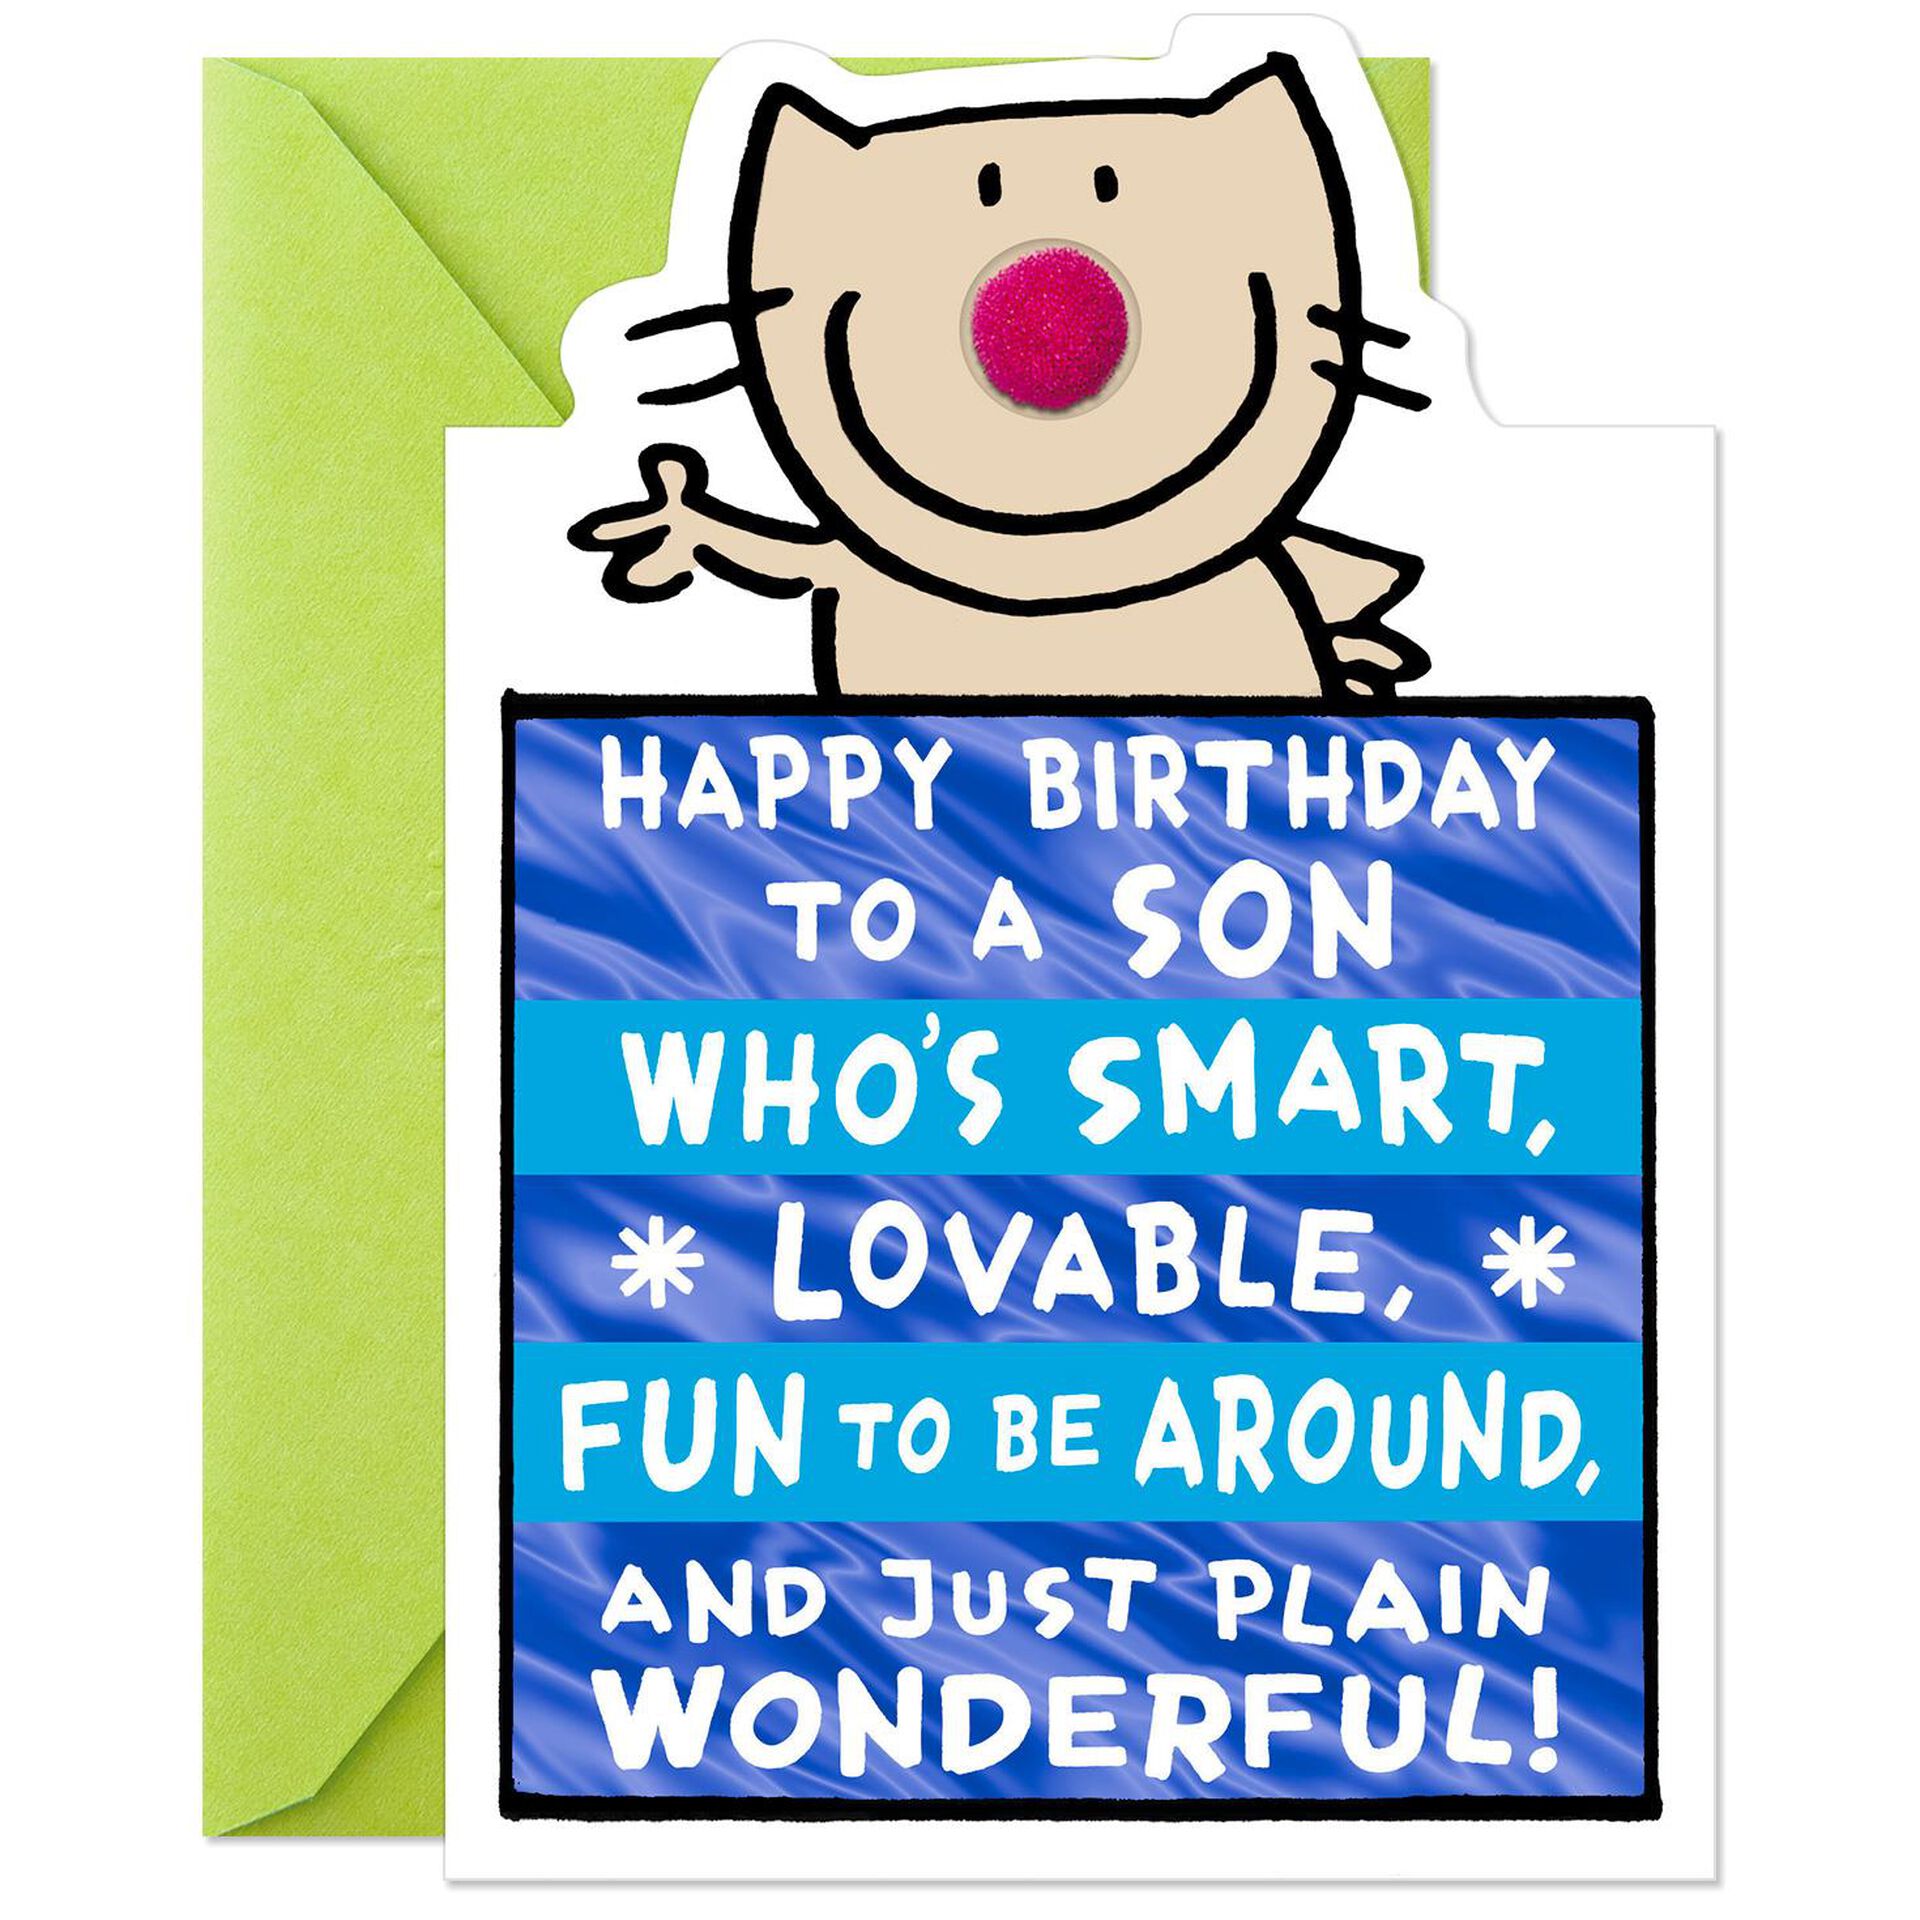 Smart, Lovable and Fun Funny Birthday Card for Son - Greeting Cards ...